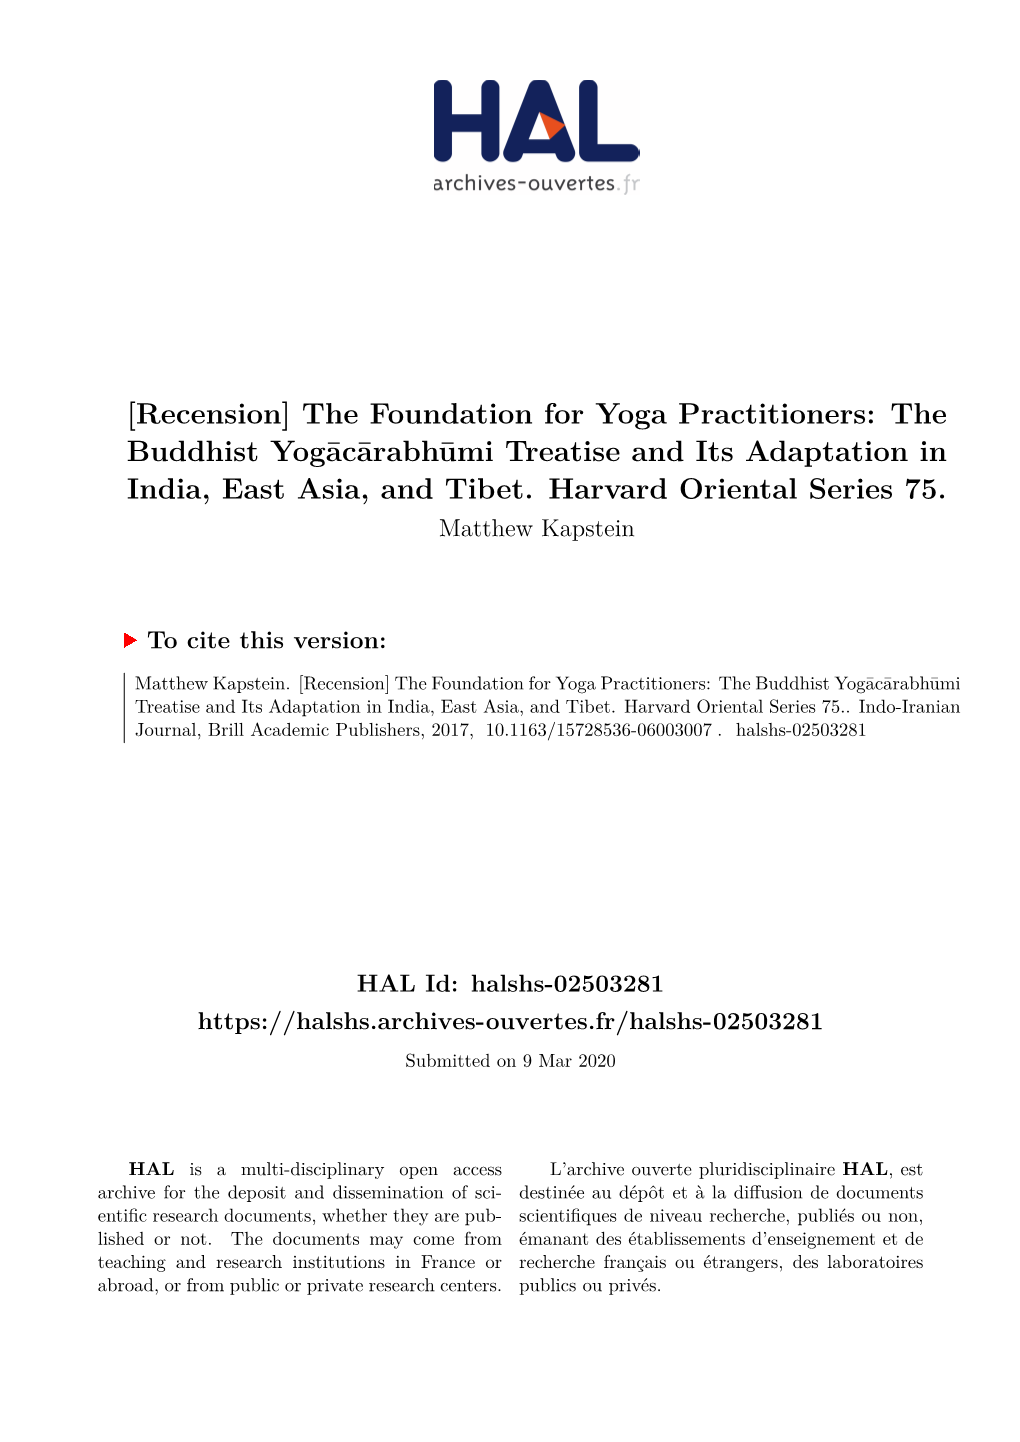 The Foundation for Yoga Practitioners: the Buddhist Yogācārabhūmi Treatise and Its Adaptation in India, East Asia, and Tibet